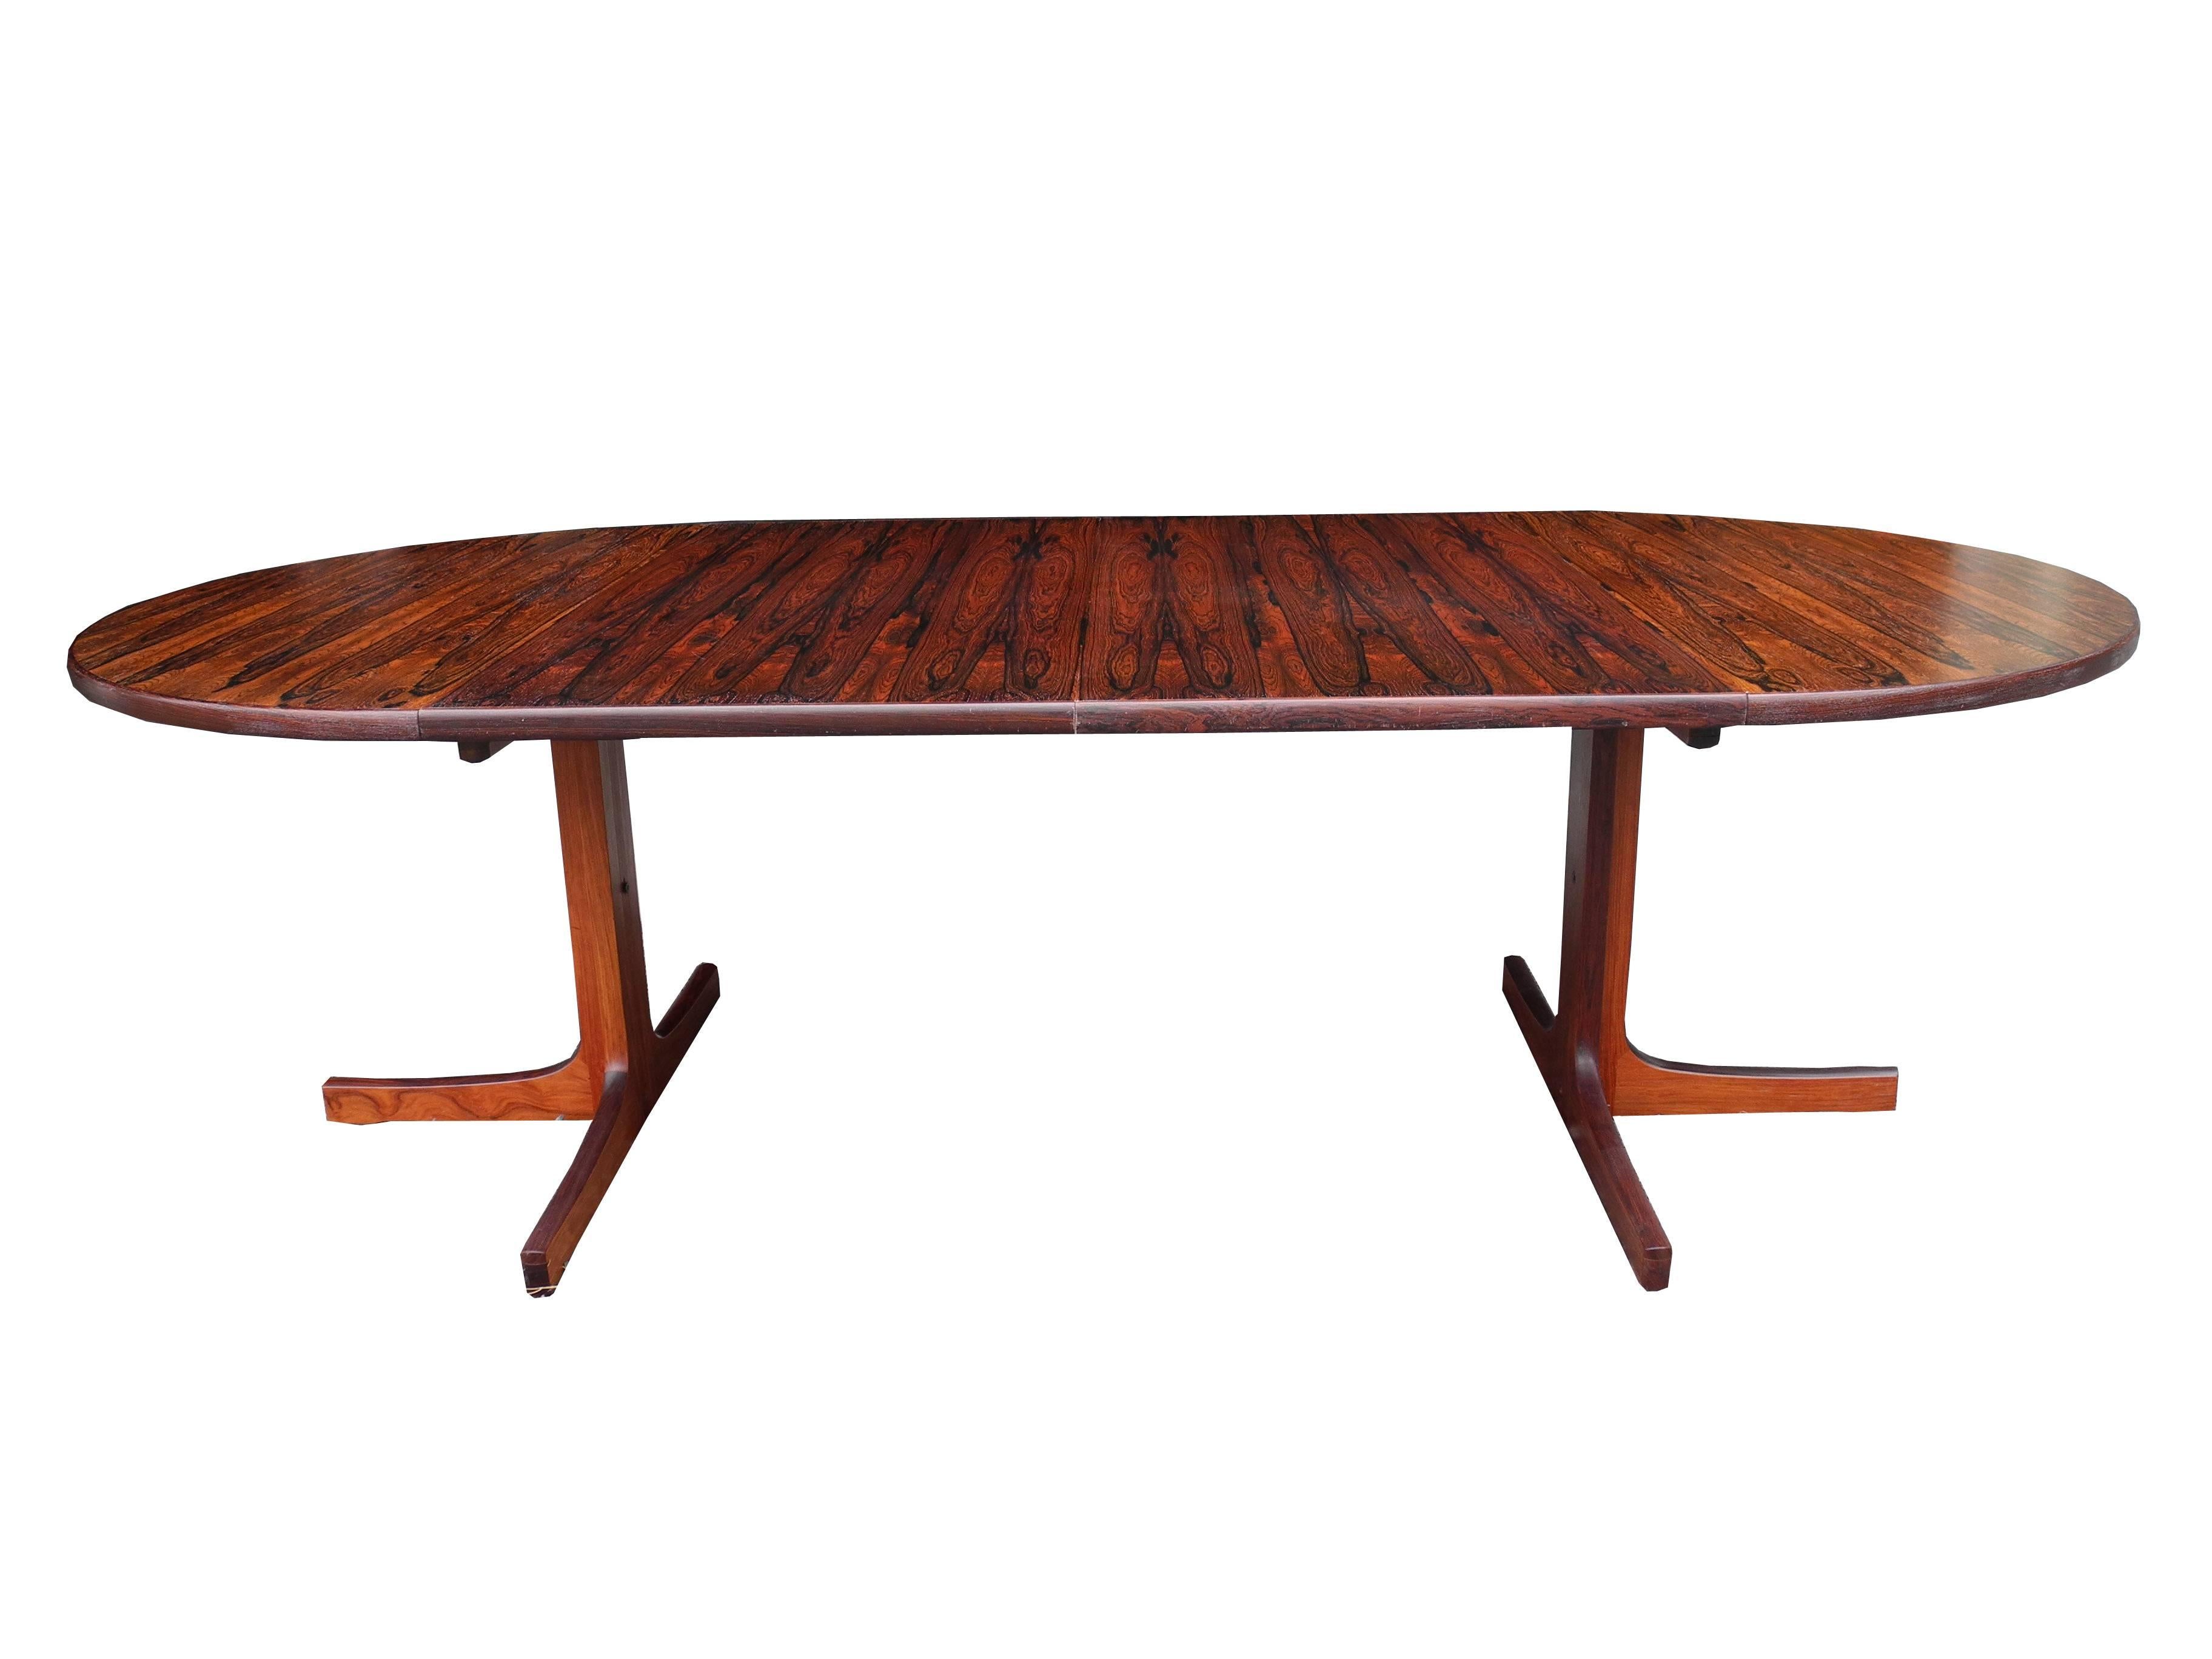 Scandinavian Modern Danish Modern Round Rosewood Dining Table by Niels Otto Møller with Two Leaves